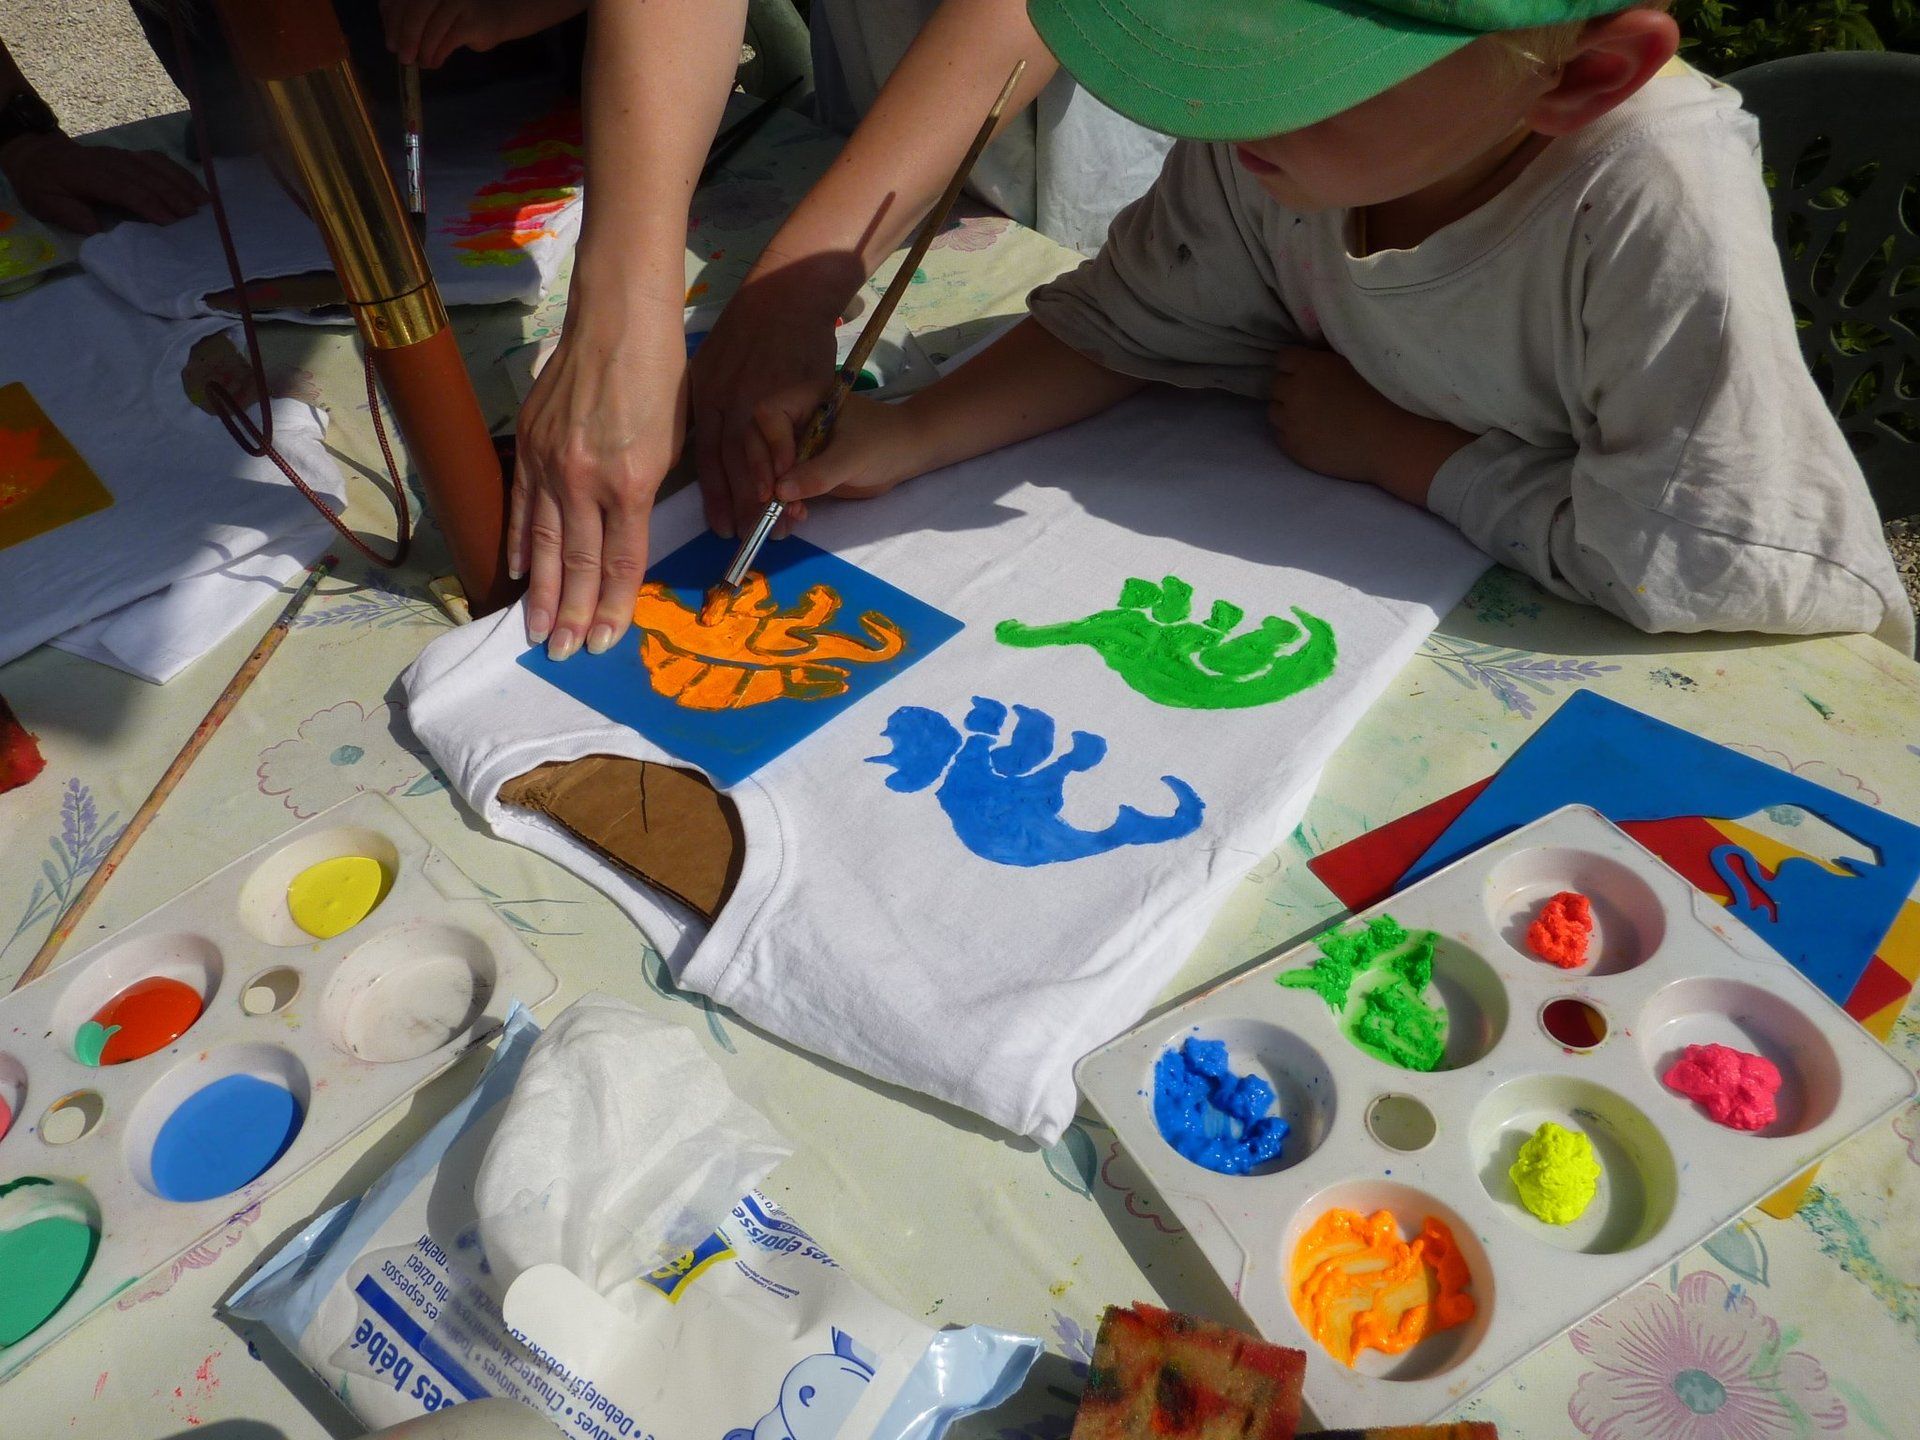 a child with green hat painting a t-shirt